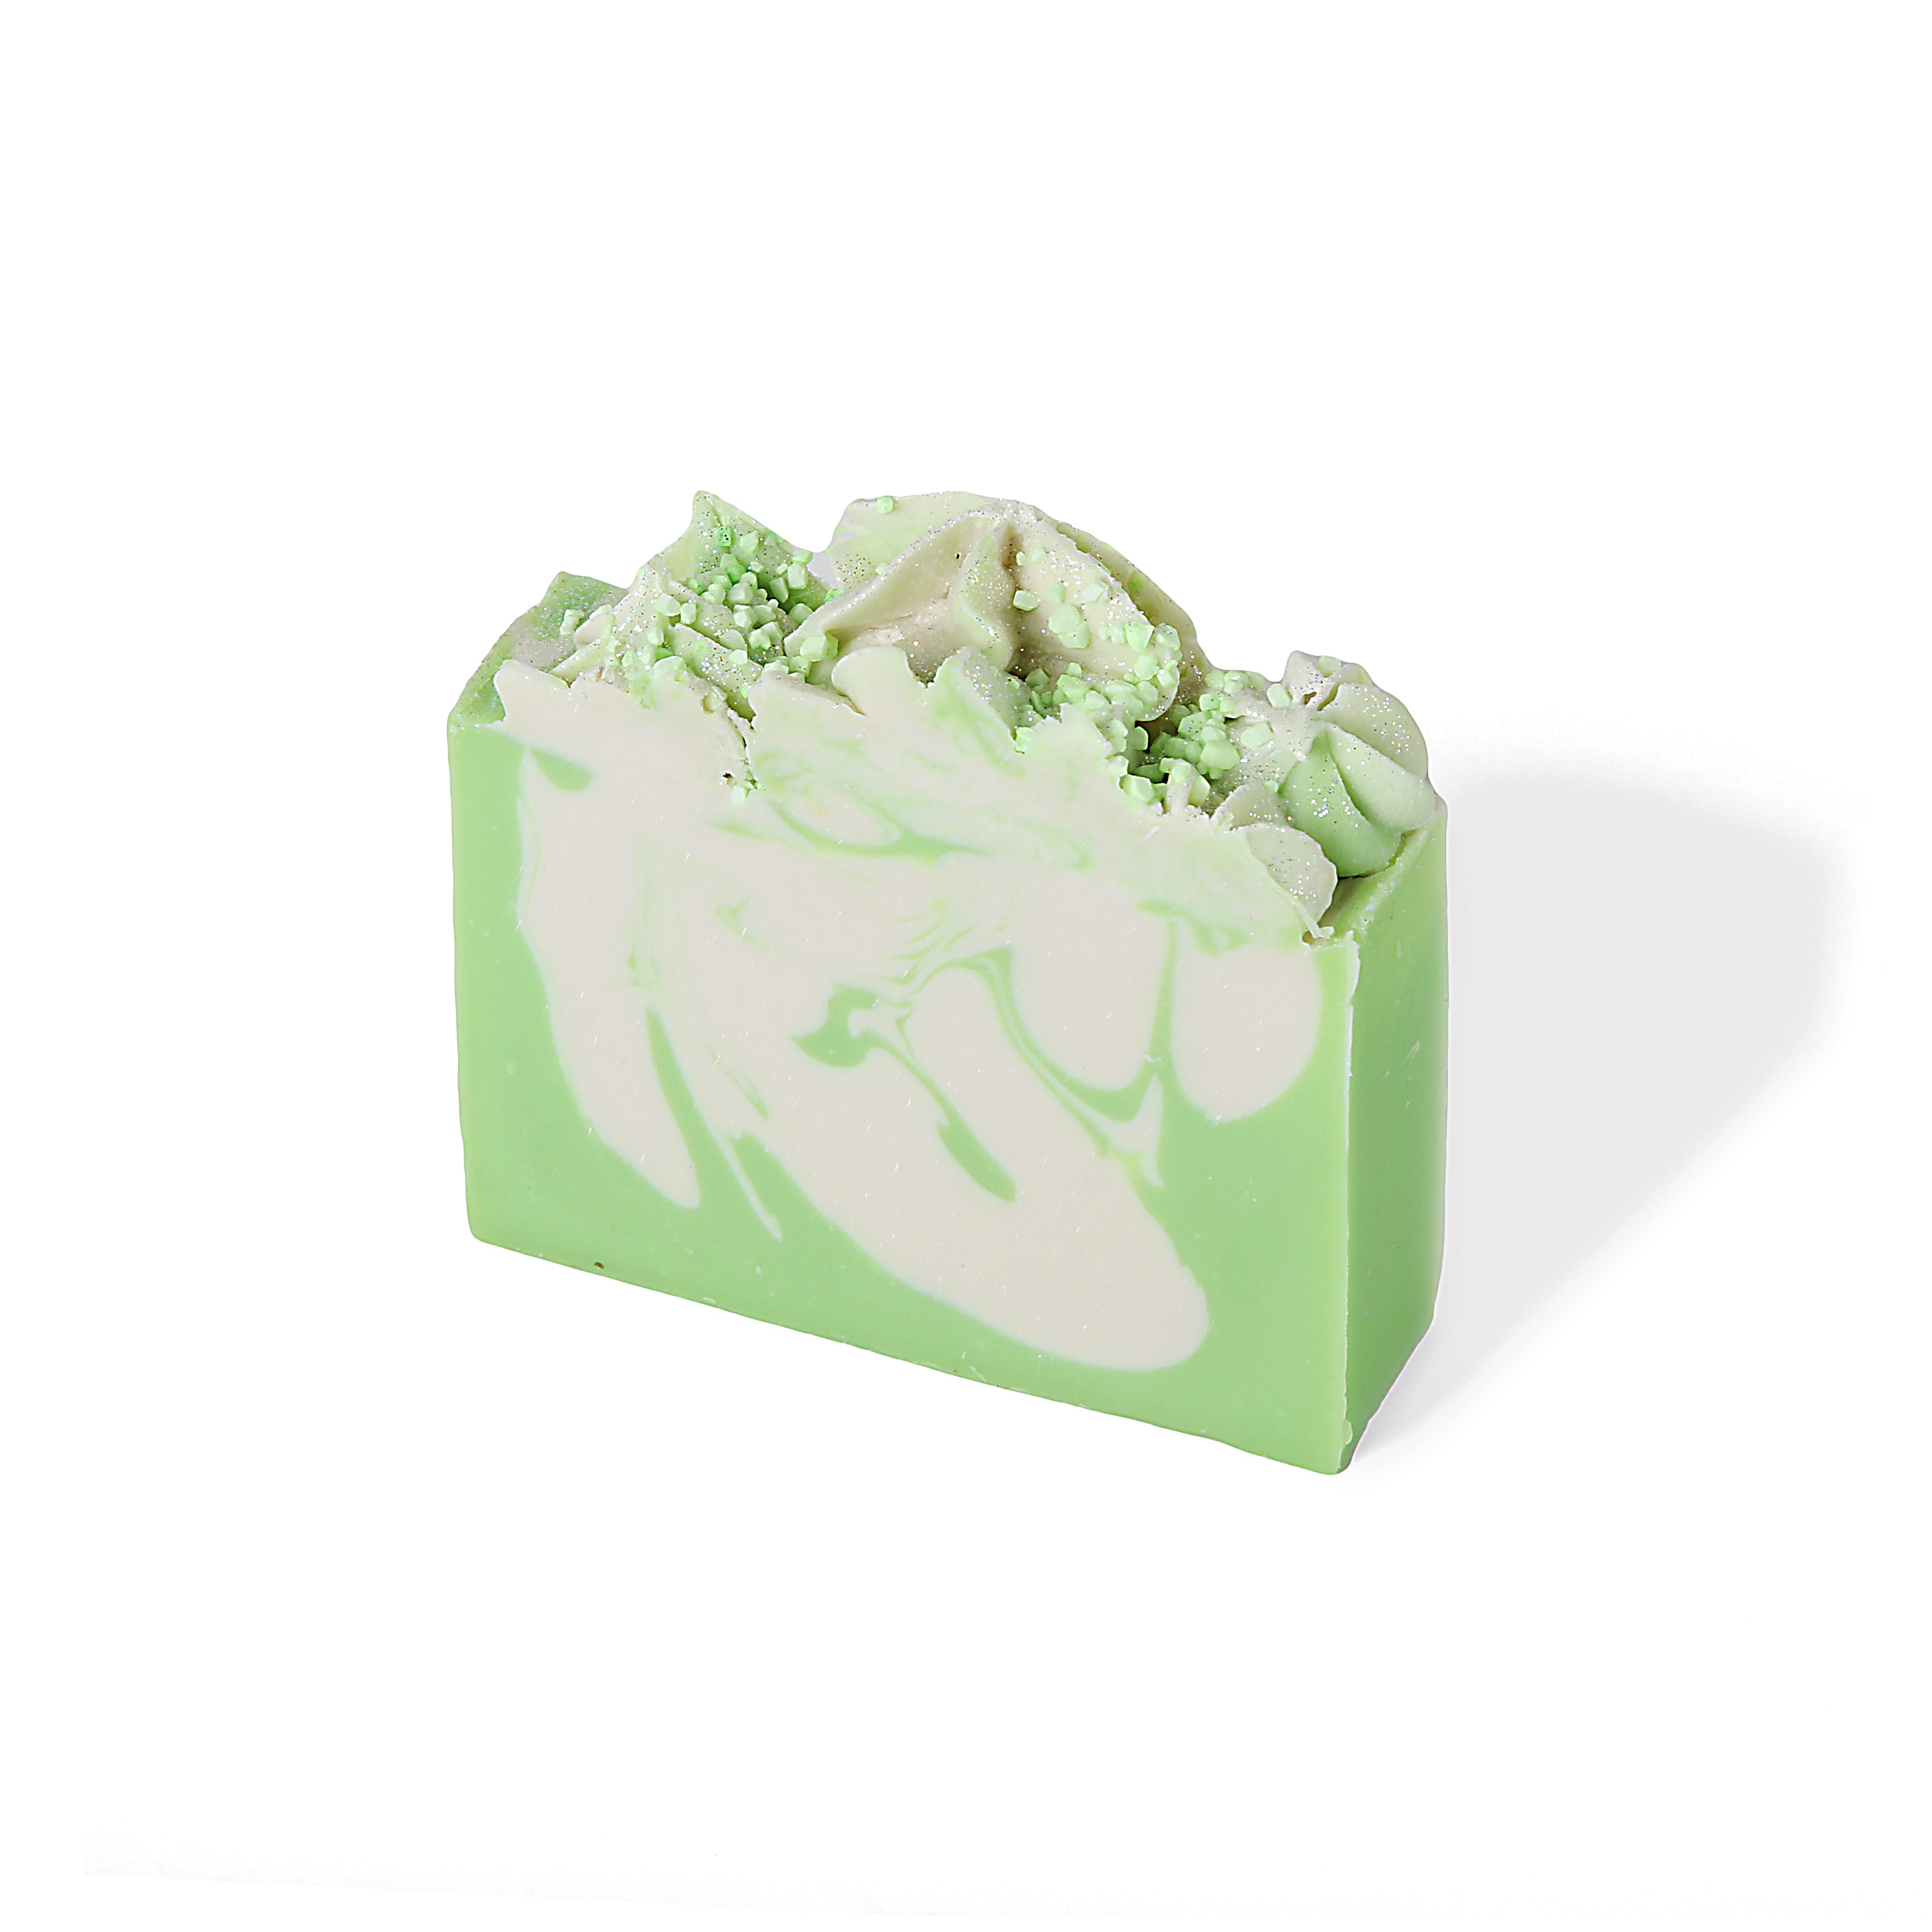 A mint green and white swirled bar soap with a fluffy frosting top.